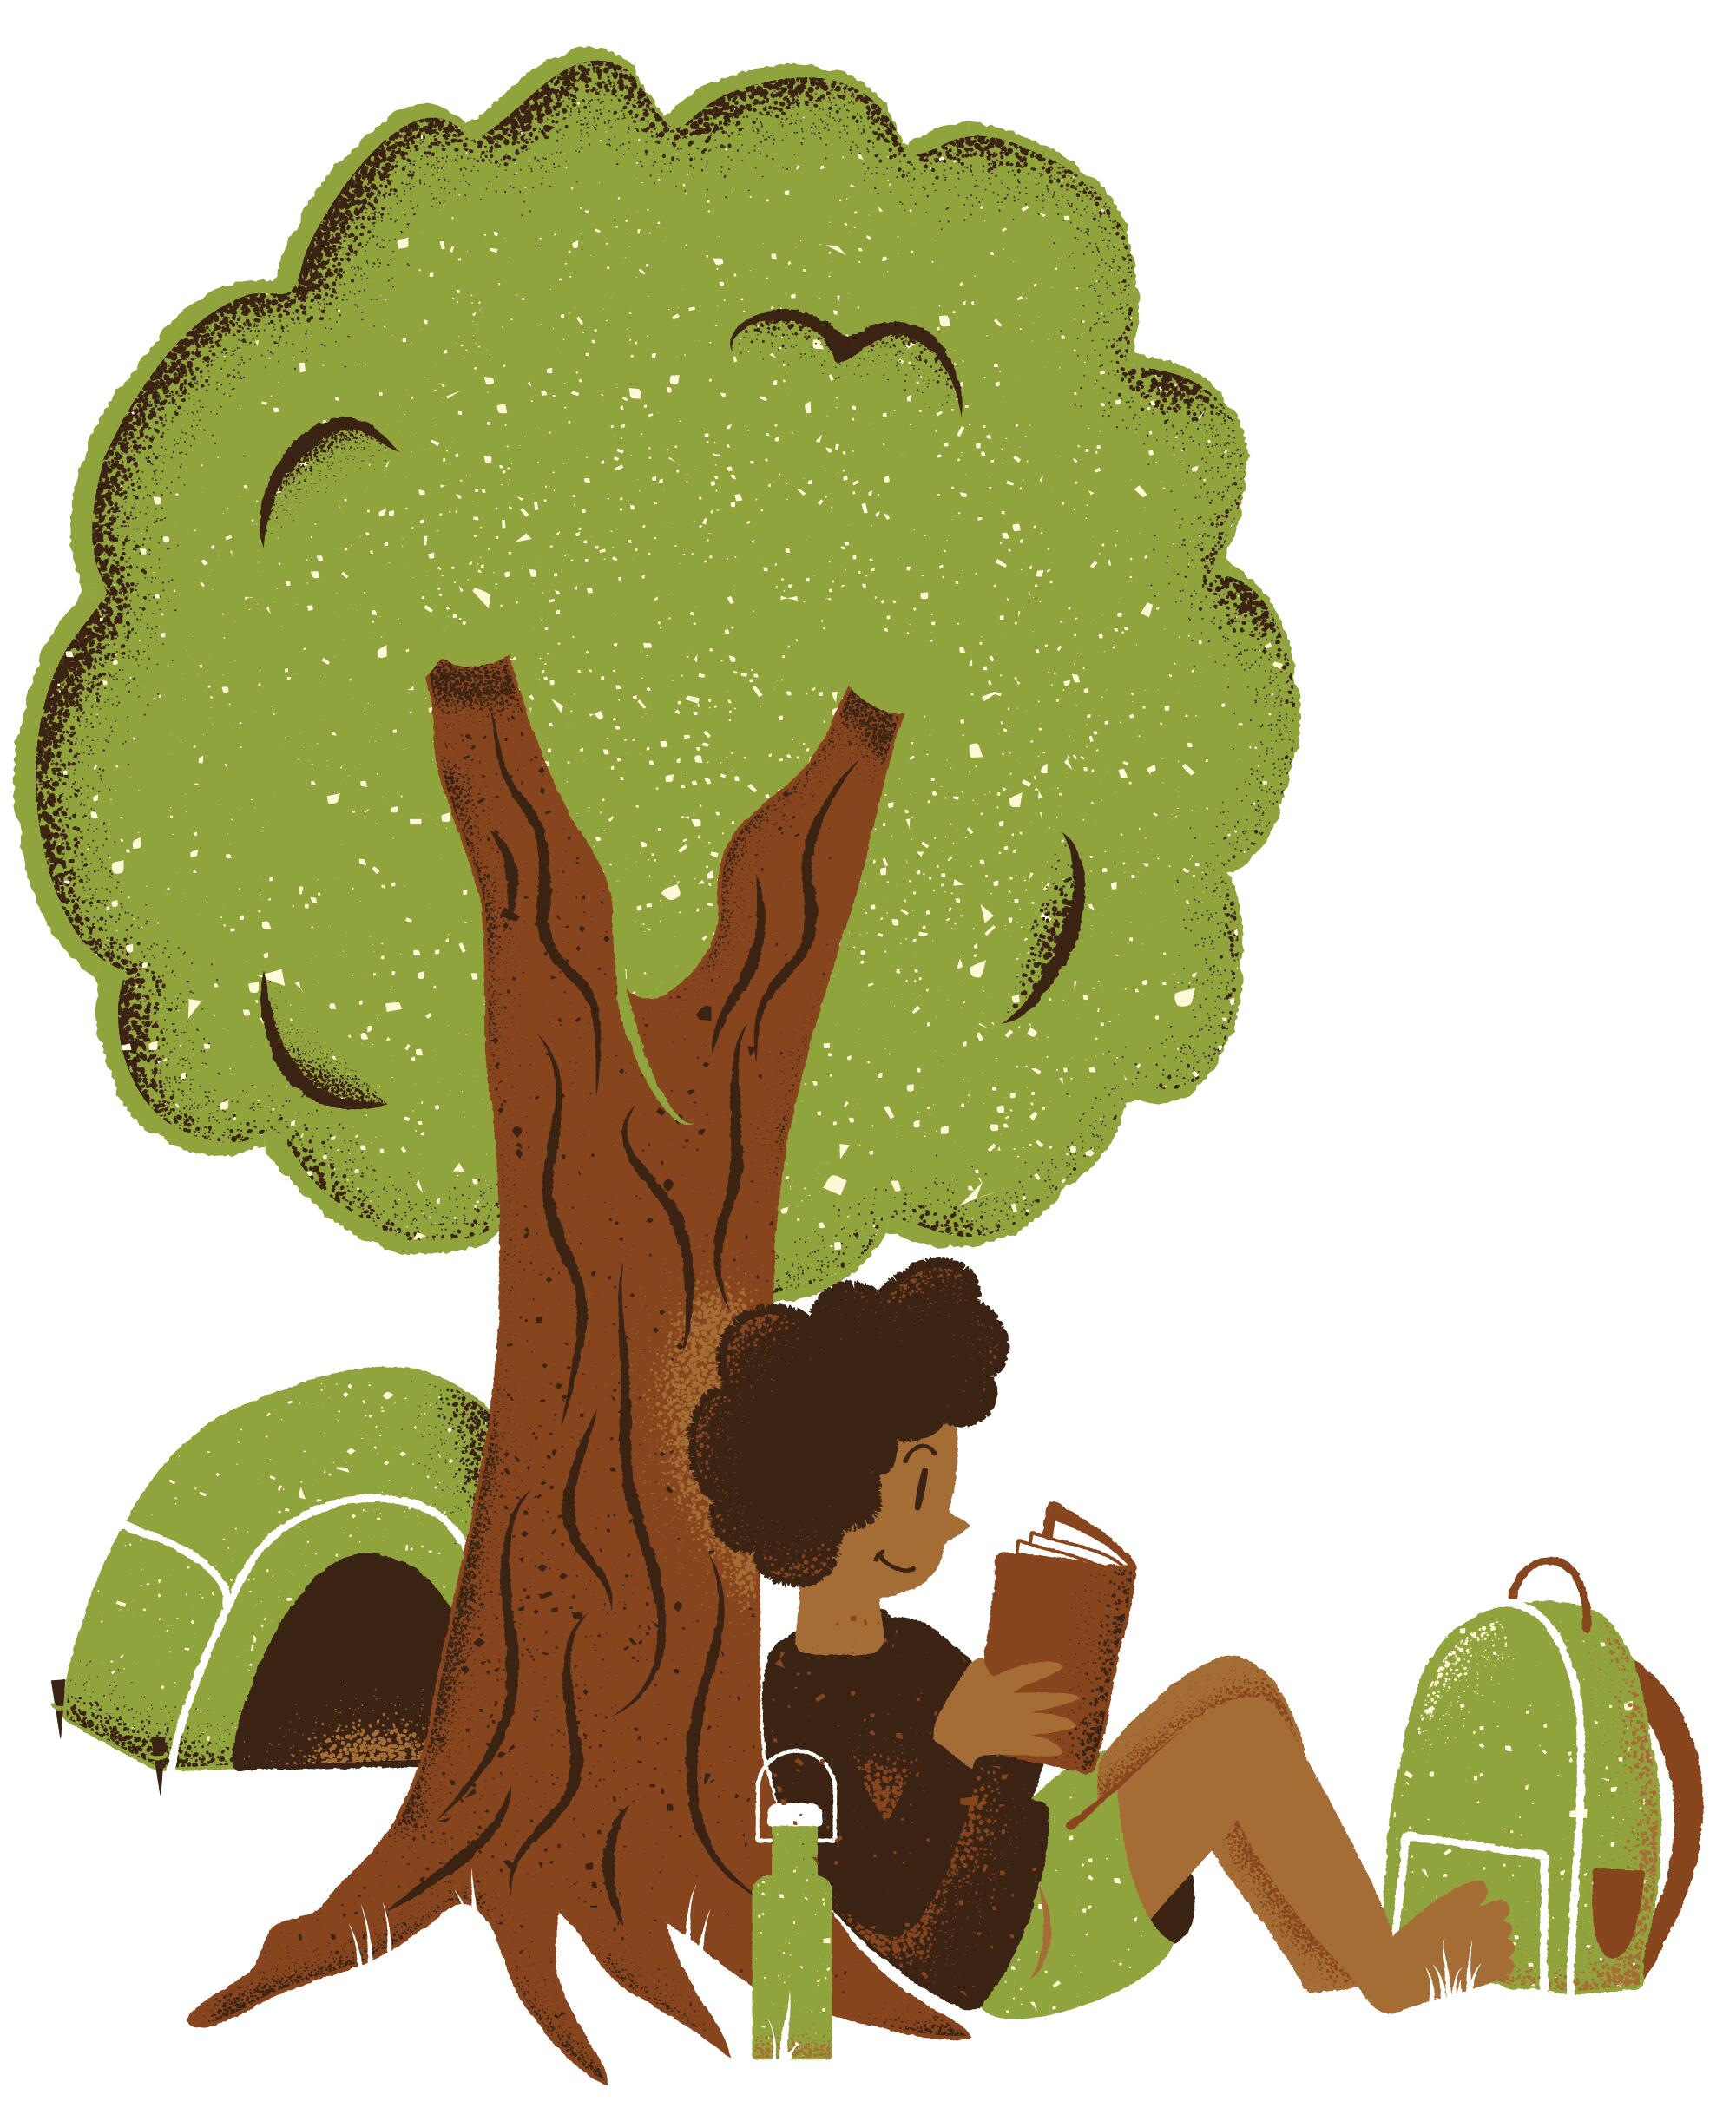 Illustration of a person sitting at the foot of a tree and reading with a campsite behind them